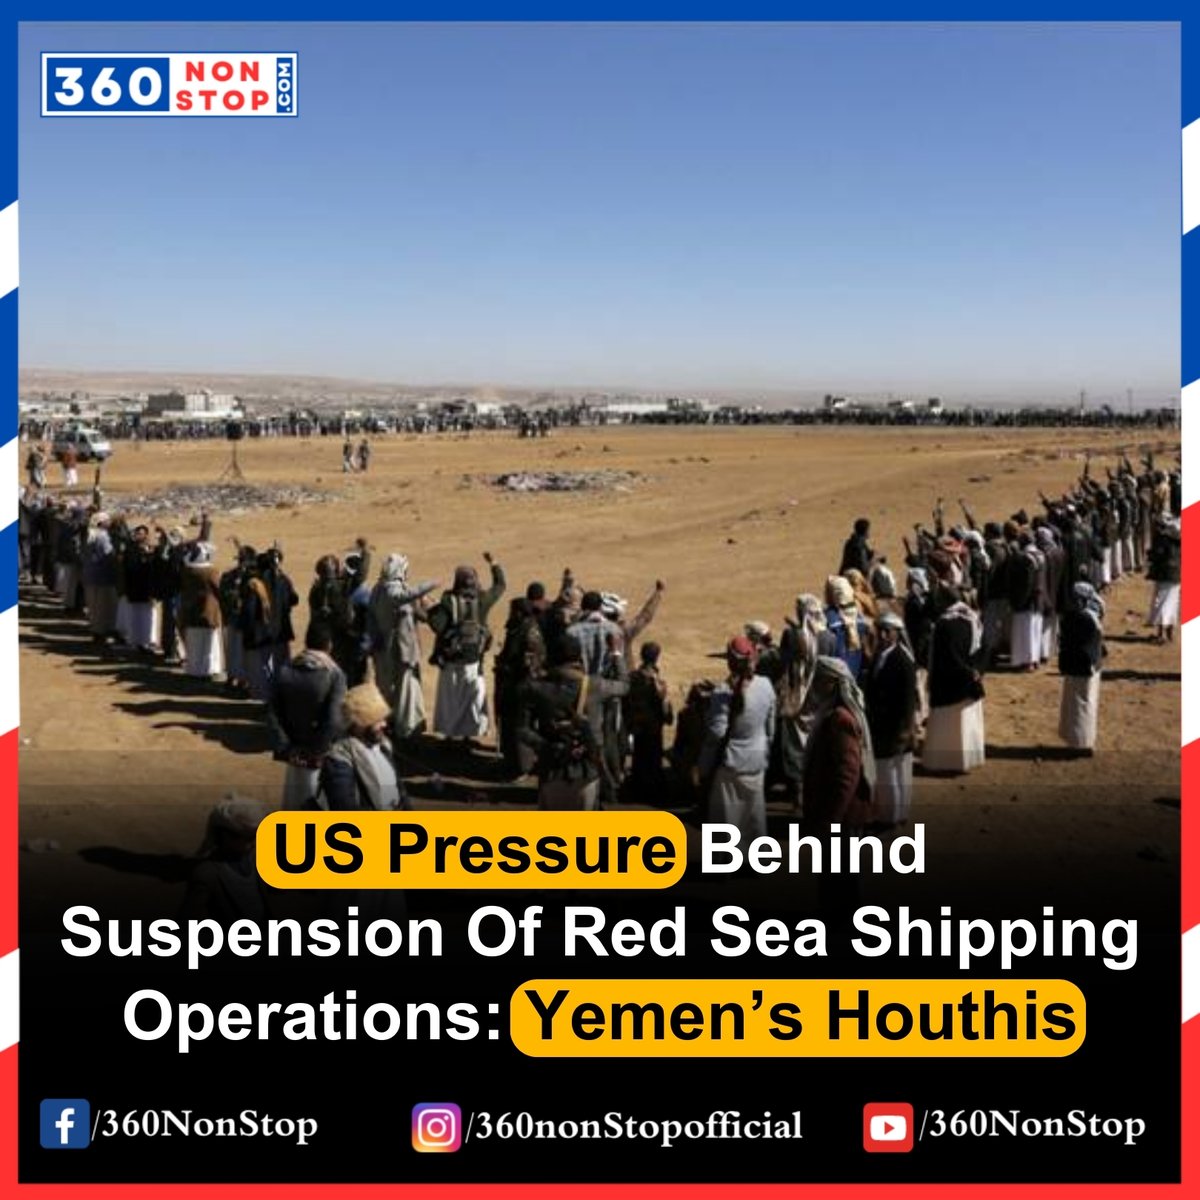 🌊 Daily Update: Yemen's Houthis Attribute Suspension of Red Sea Shipping to US Pressure!

📱 Follow us on Instagram: 
shorturl.at/zKORU

🌐 Join Our Facebook Group:
 shorturl.at/mqy14

#HouthisStatement #RedSeaShipping #GeopoliticalNews #USPressure #Yemen #360NonStop